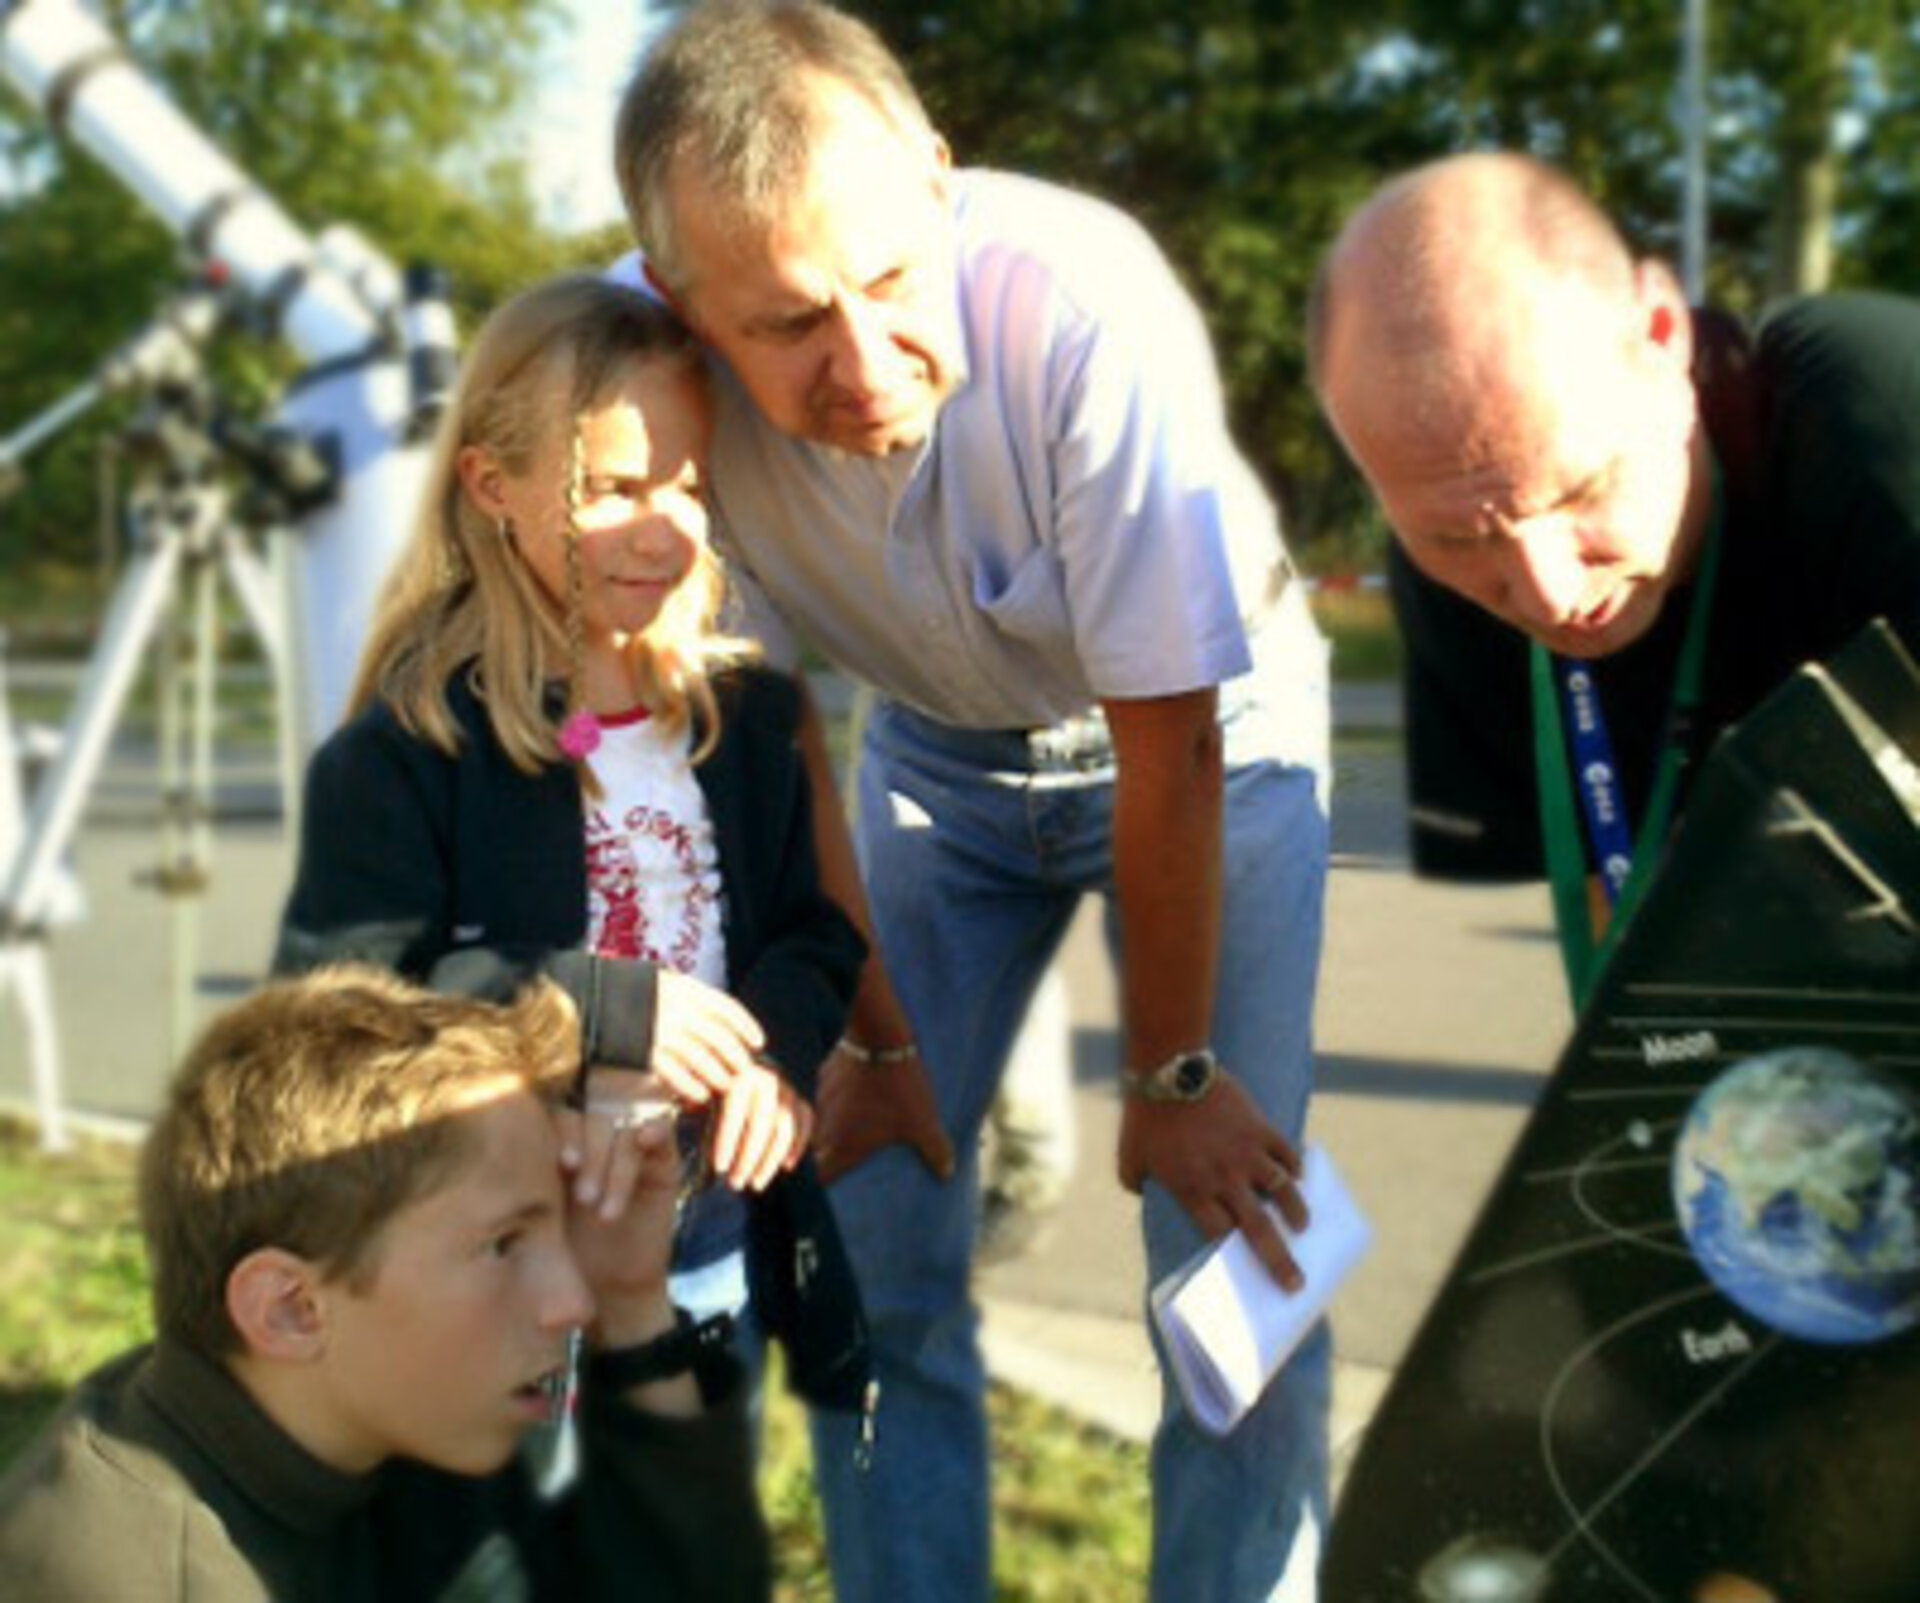 Amateur astronomer helps ESOC guests view the Sun